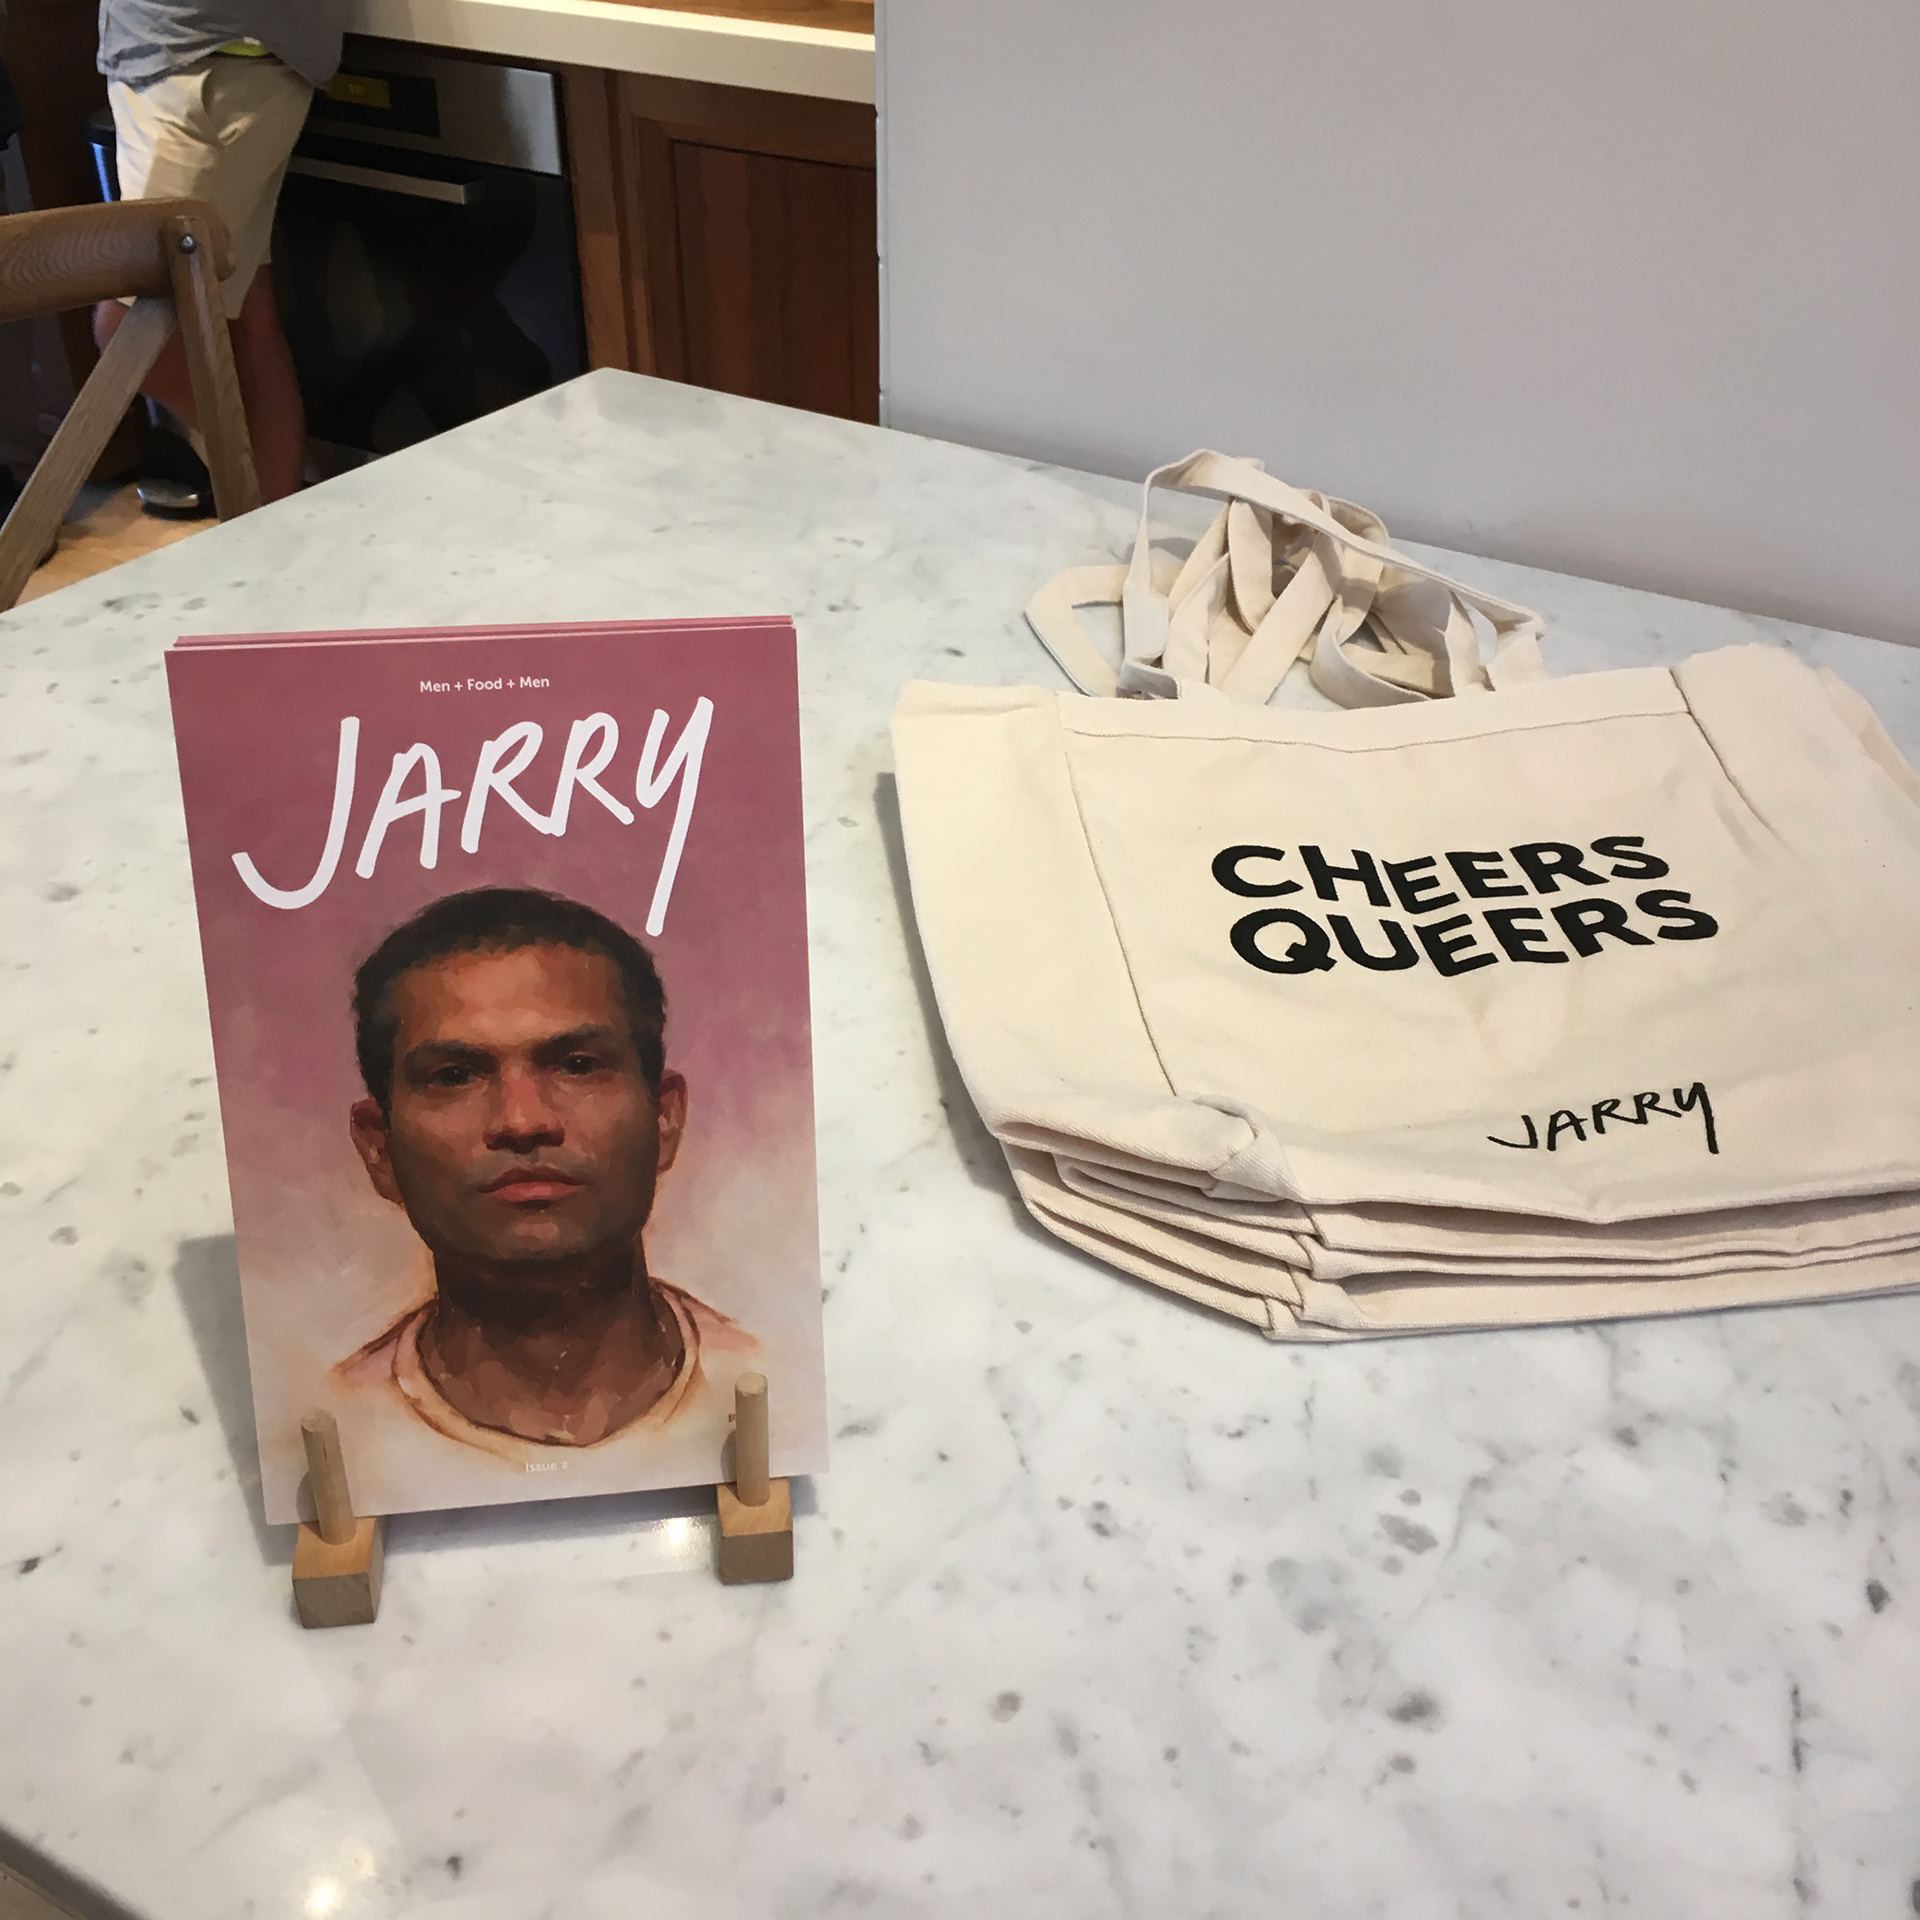 Jarry issue 2 and tote bags.